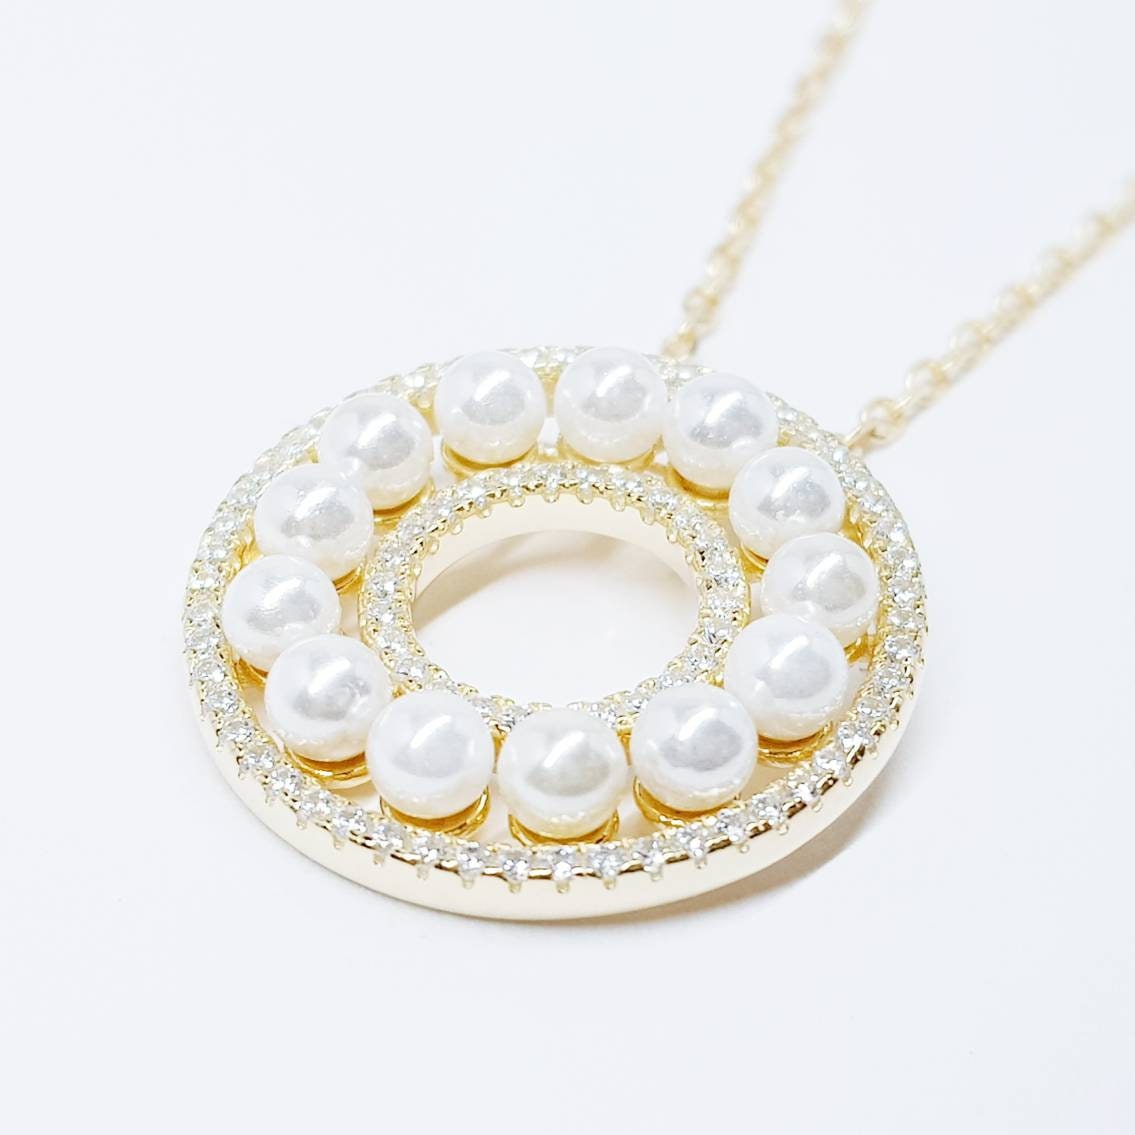 Elegant pearl pendant set in silver with sparkling white cubic zirconia, pearl circle necklace